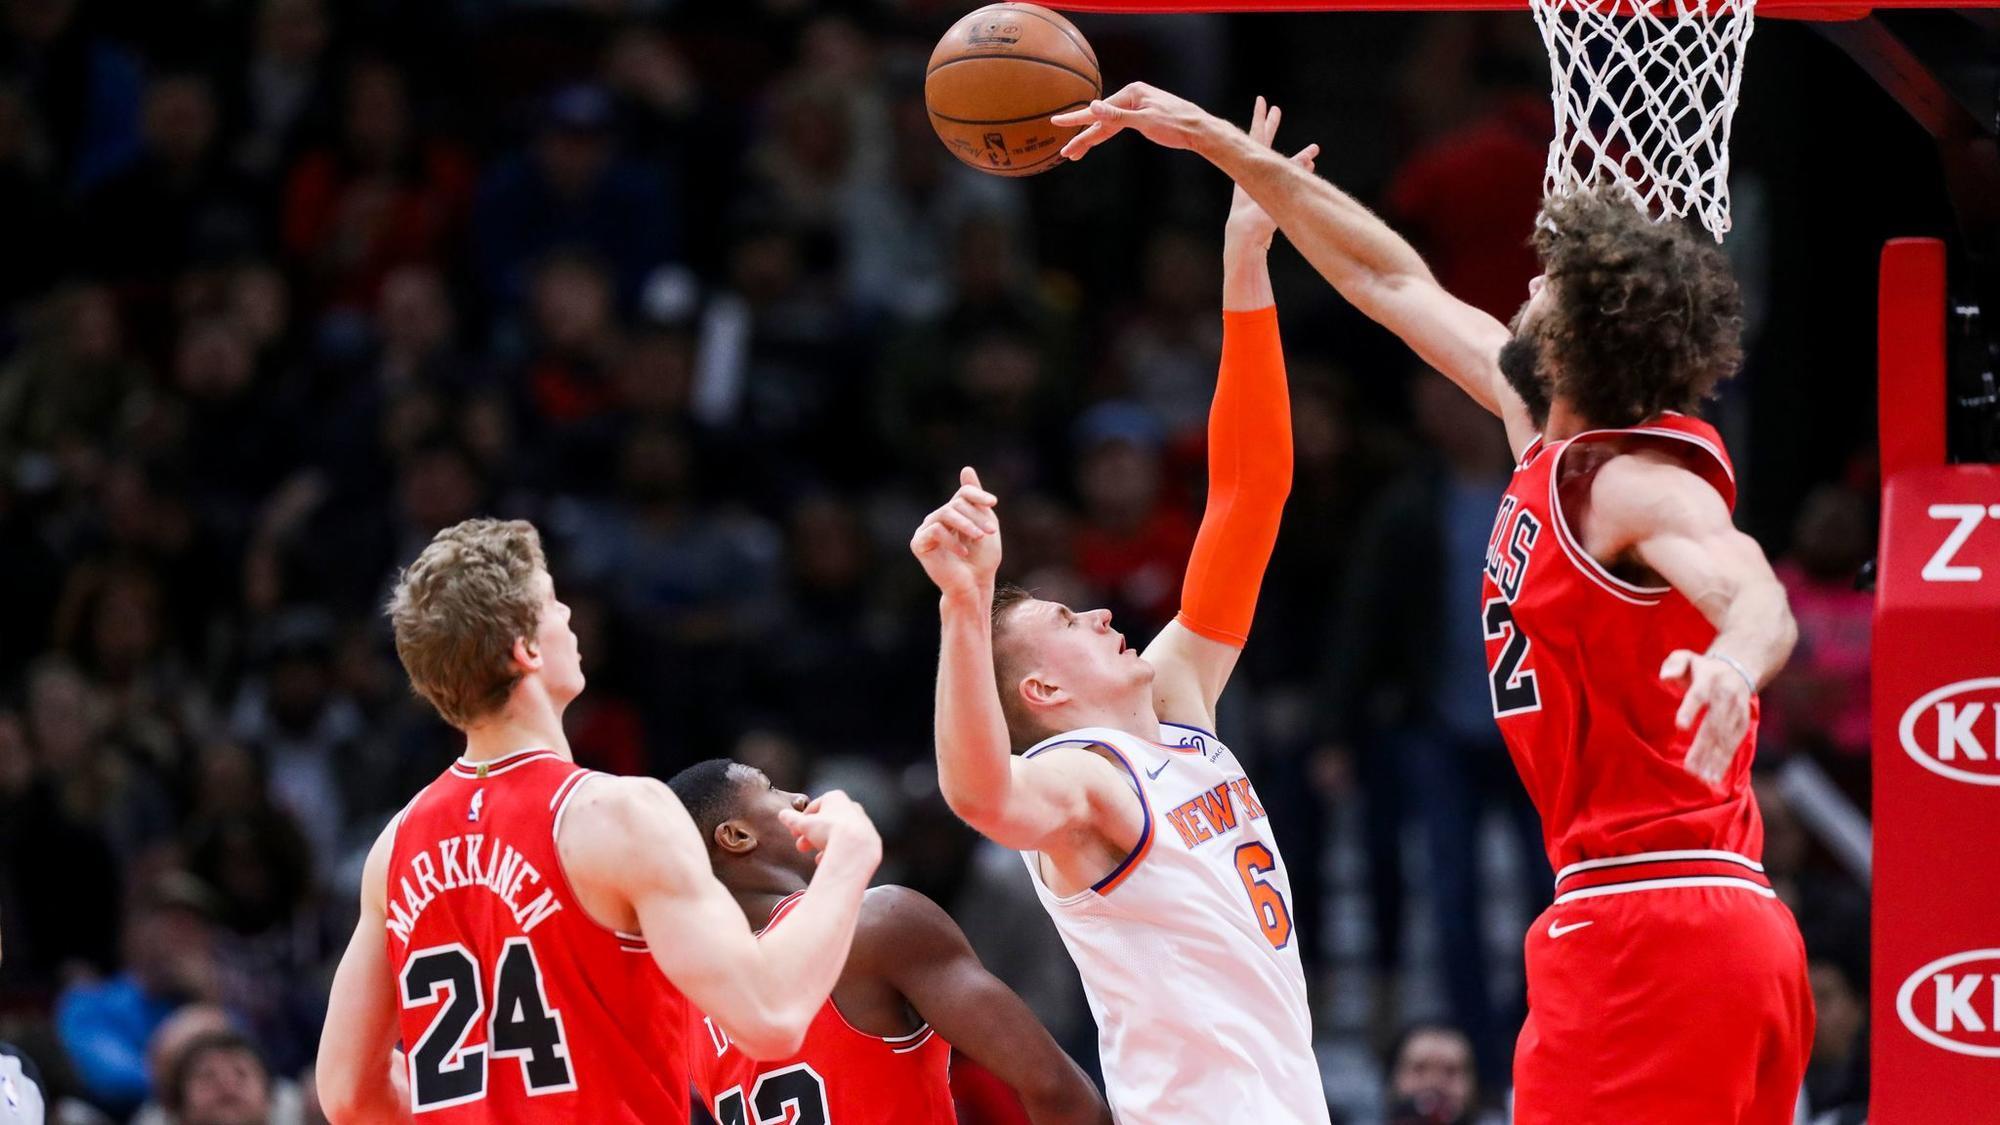 Bulls rally to down Knicks 92-87 for 9th victory in 11 games